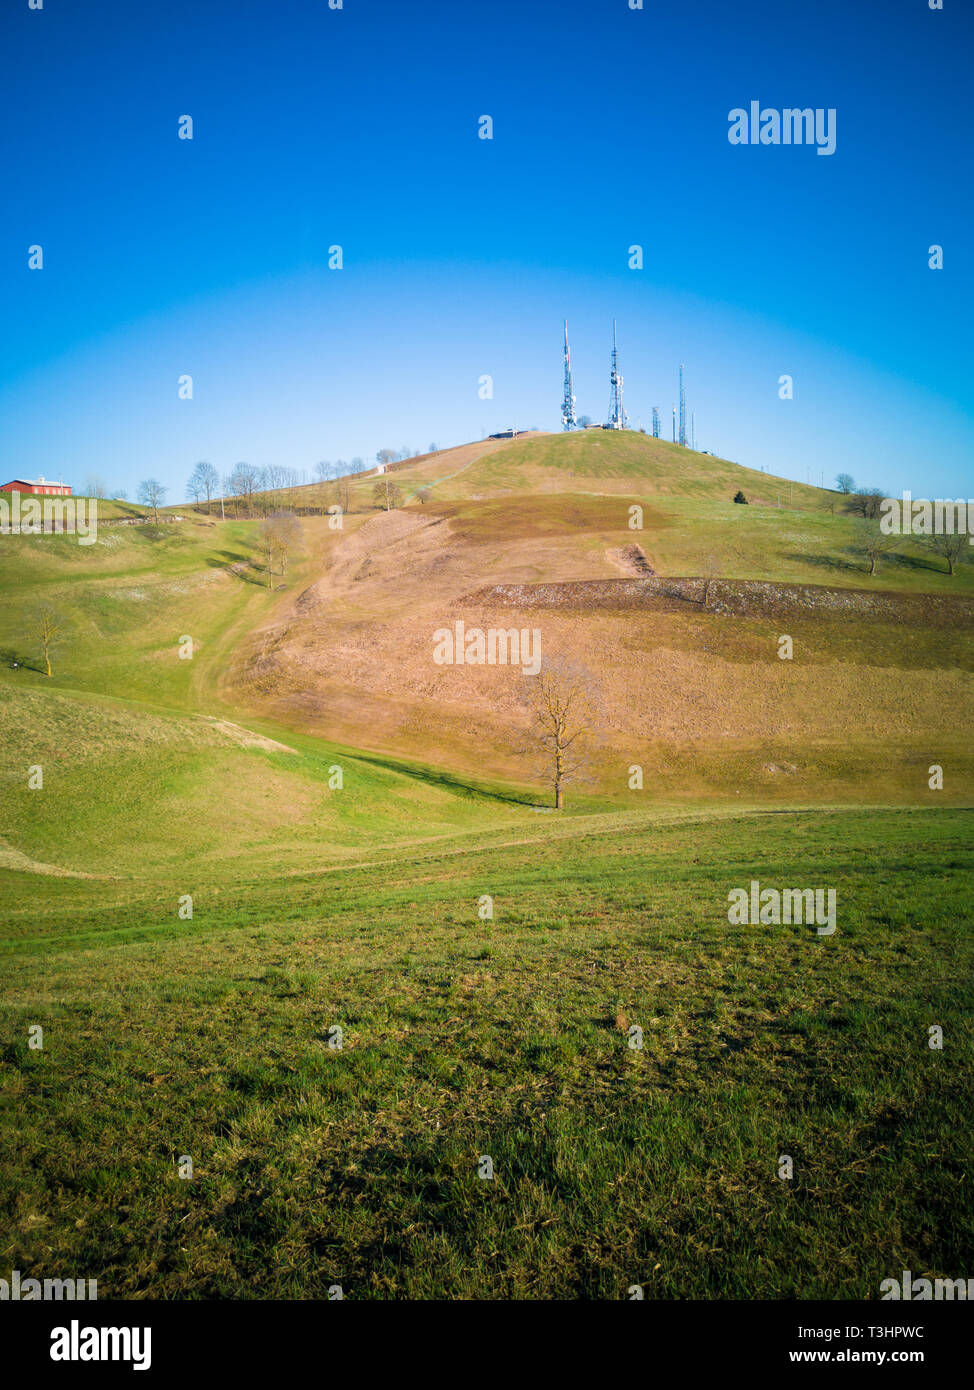 Hills with television antennas, telephone repeaters and wifi. Stock Photo